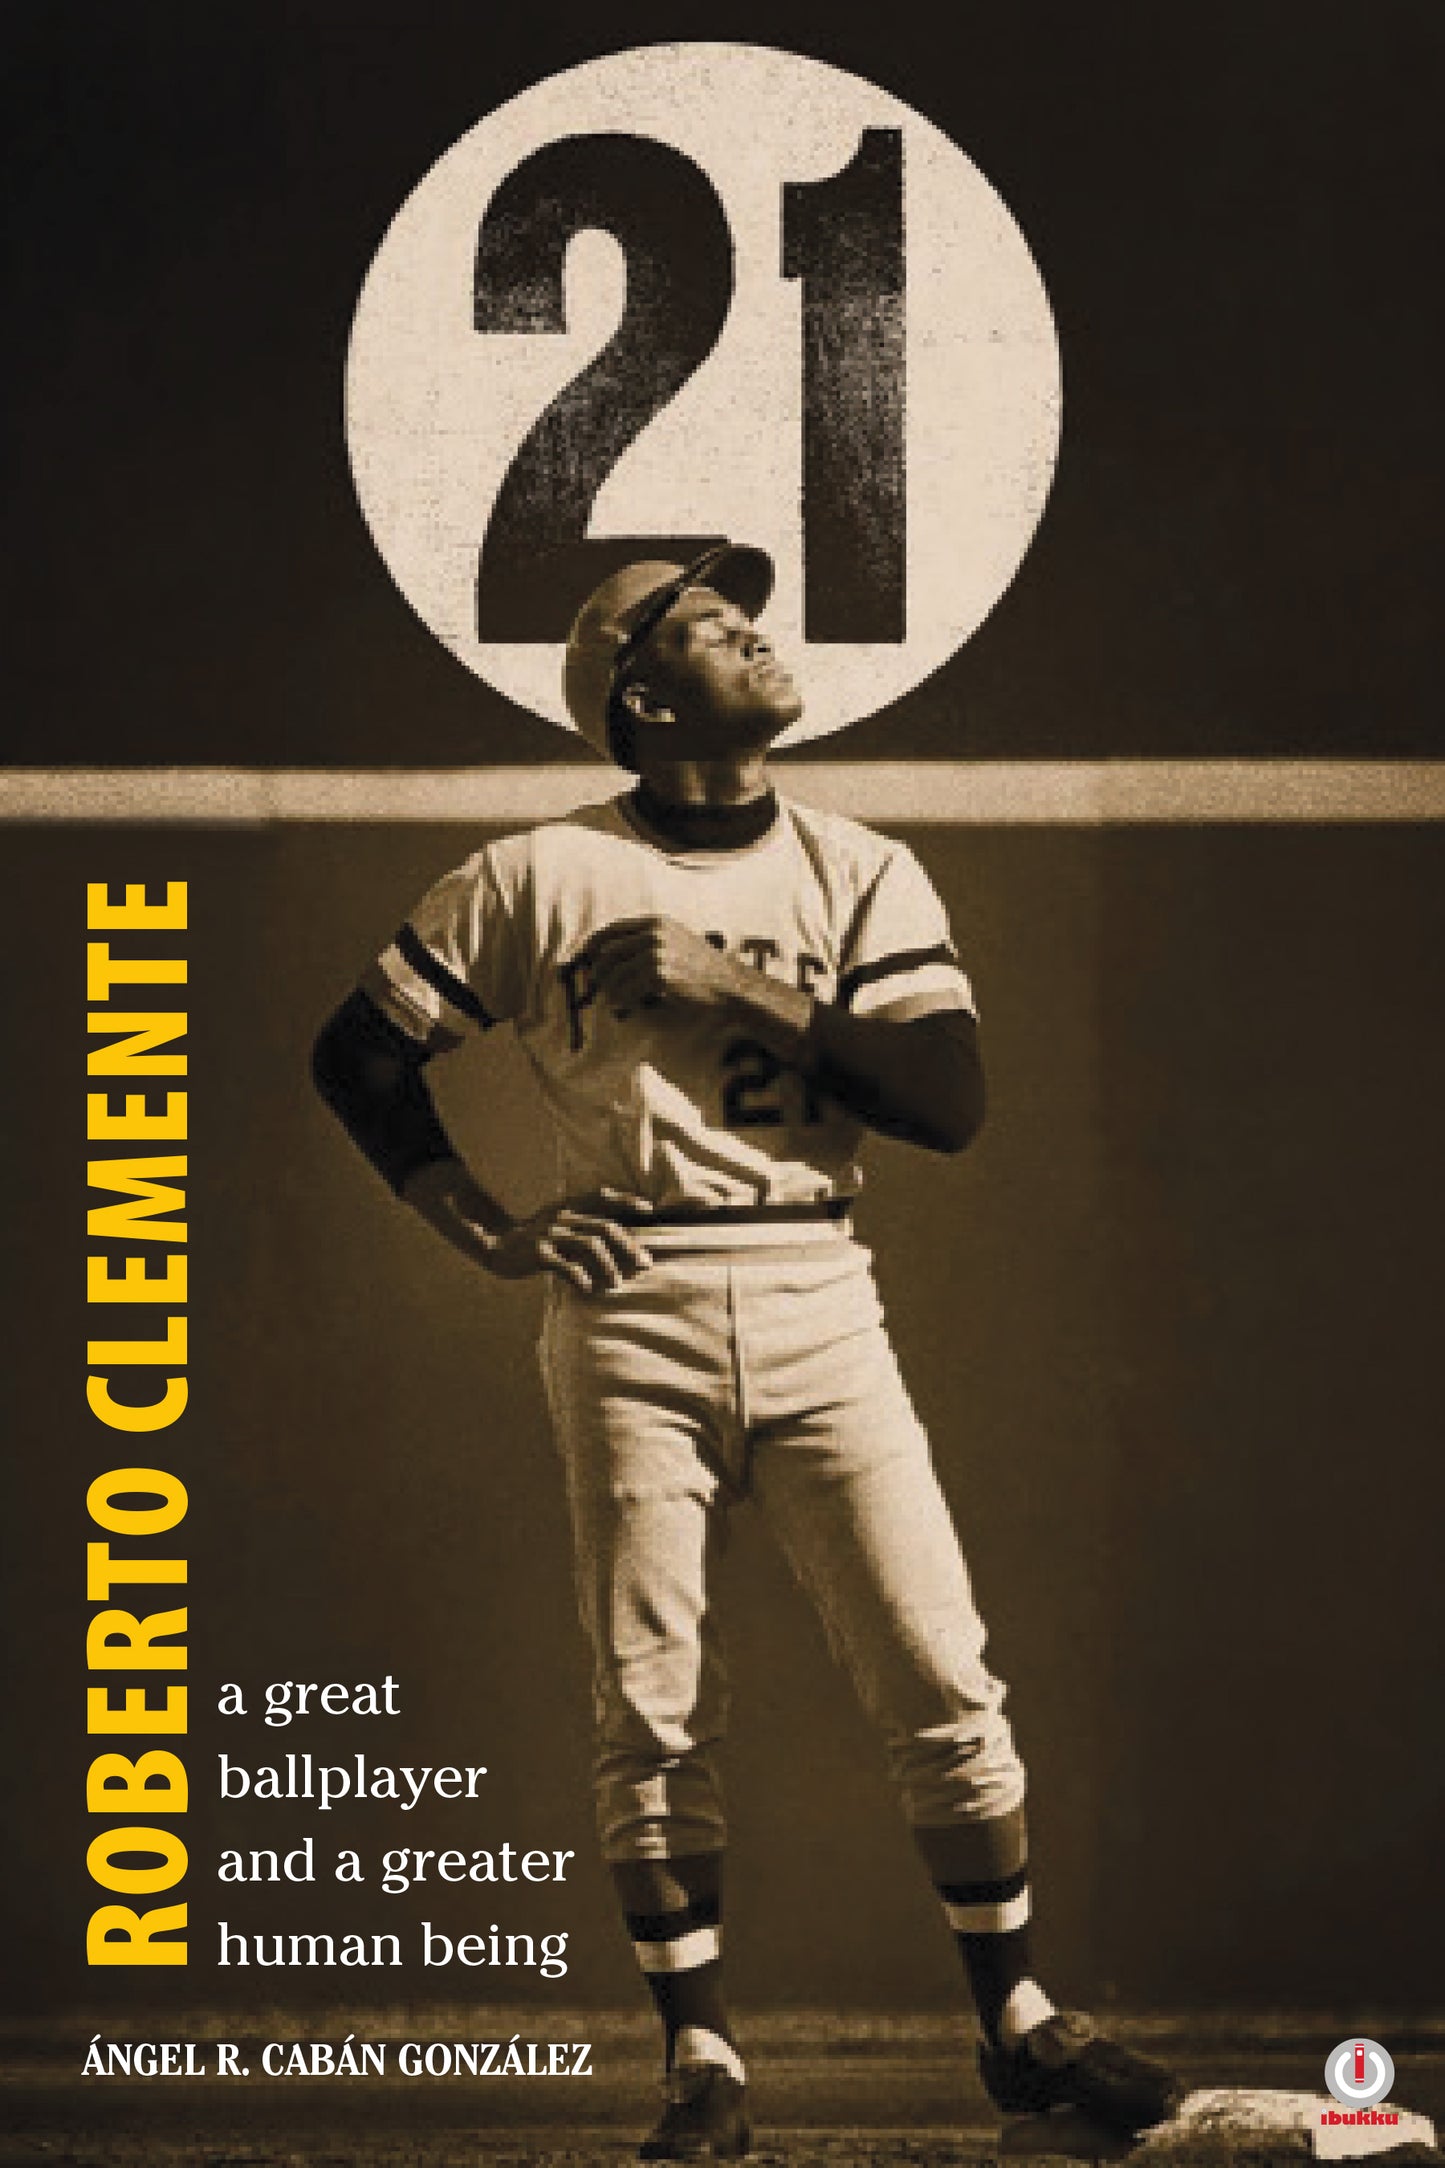 Roberto Clemente: A great ballplayer and a greater human being (Printed)